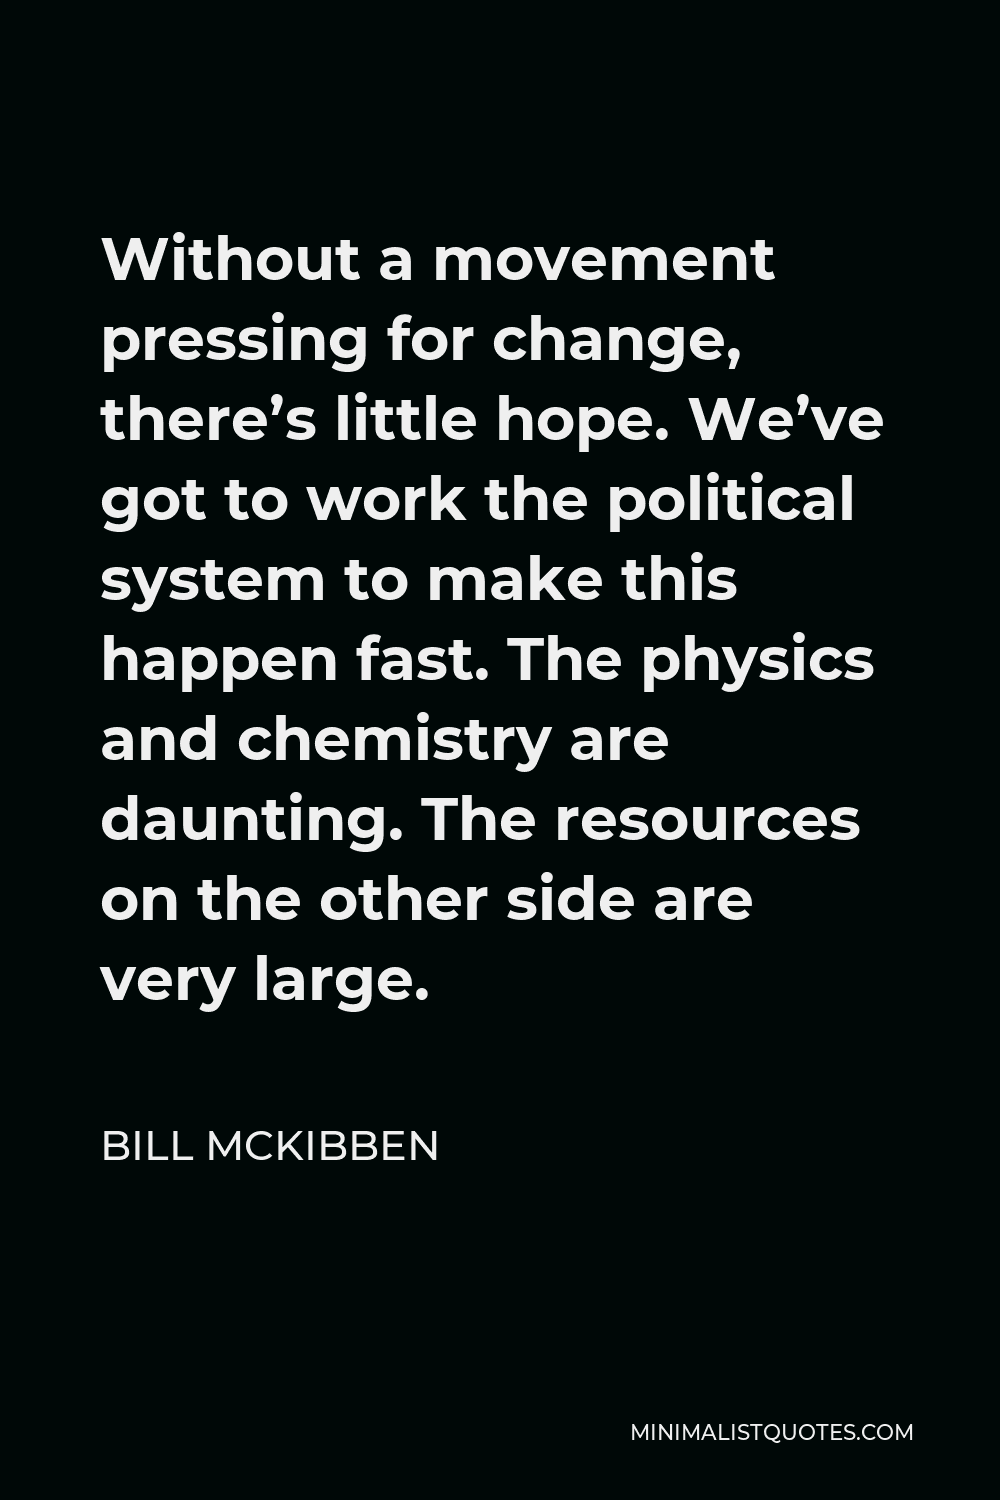 Bill McKibben Quote - Without a movement pressing for change, there’s little hope. We’ve got to work the political system to make this happen fast. The physics and chemistry are daunting. The resources on the other side are very large.